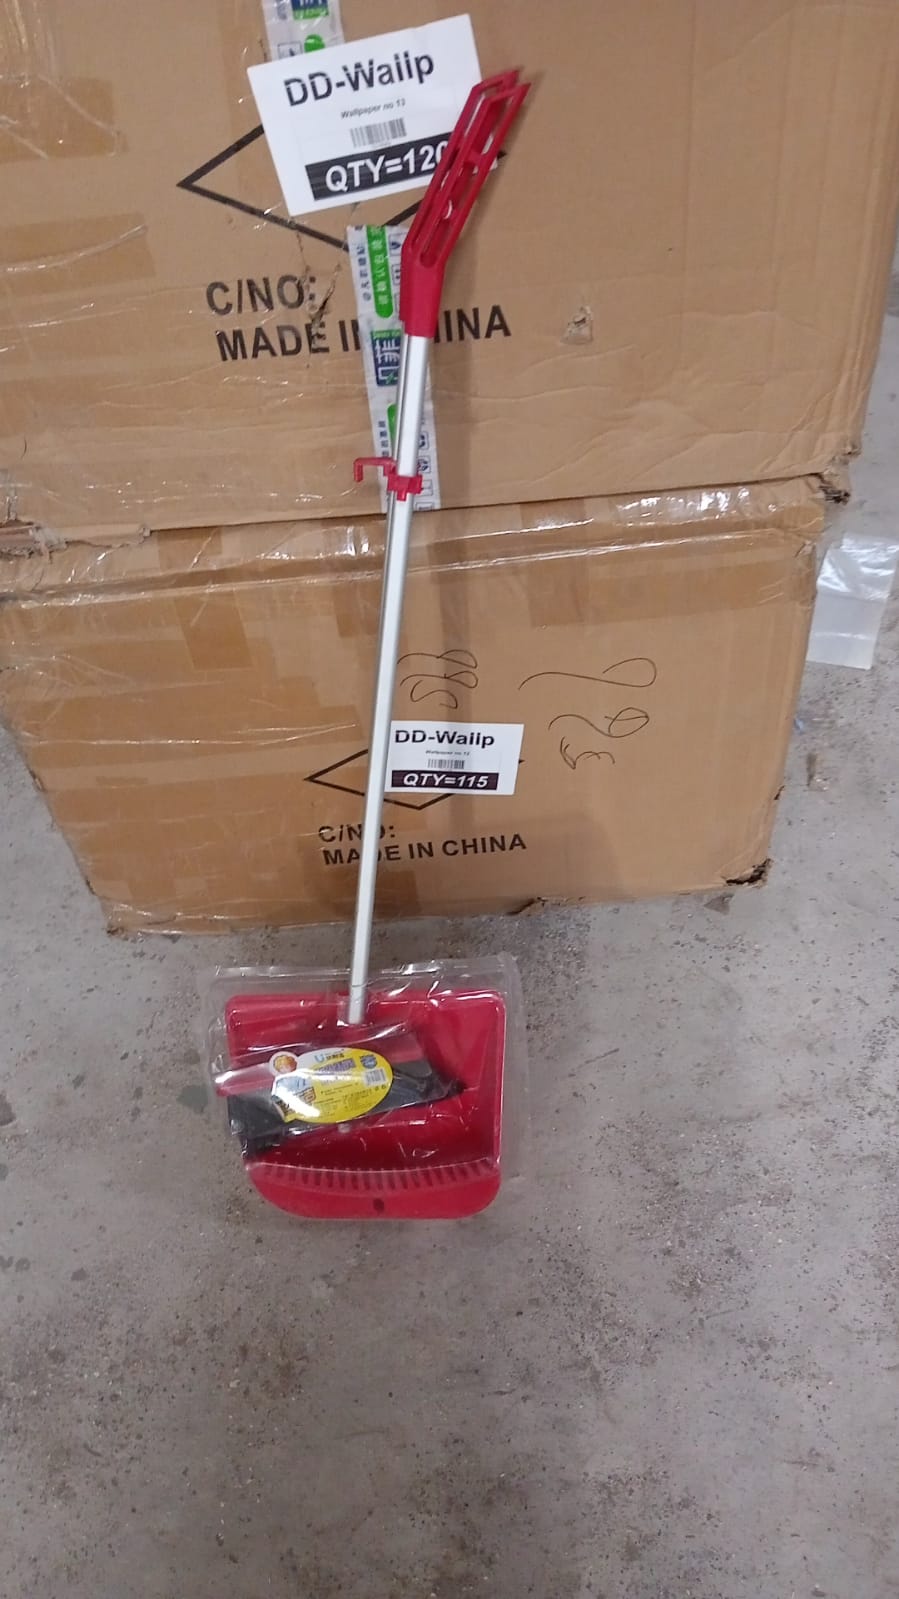 7871A Broom and Dustpan Cleaning Set Long Handled Dustpan and Brush Handle Dust Pan Broom Sweeper Long Handle Broom and Dustpan Set for Kitchen, Home, Lobby Schools, Hospital etc.